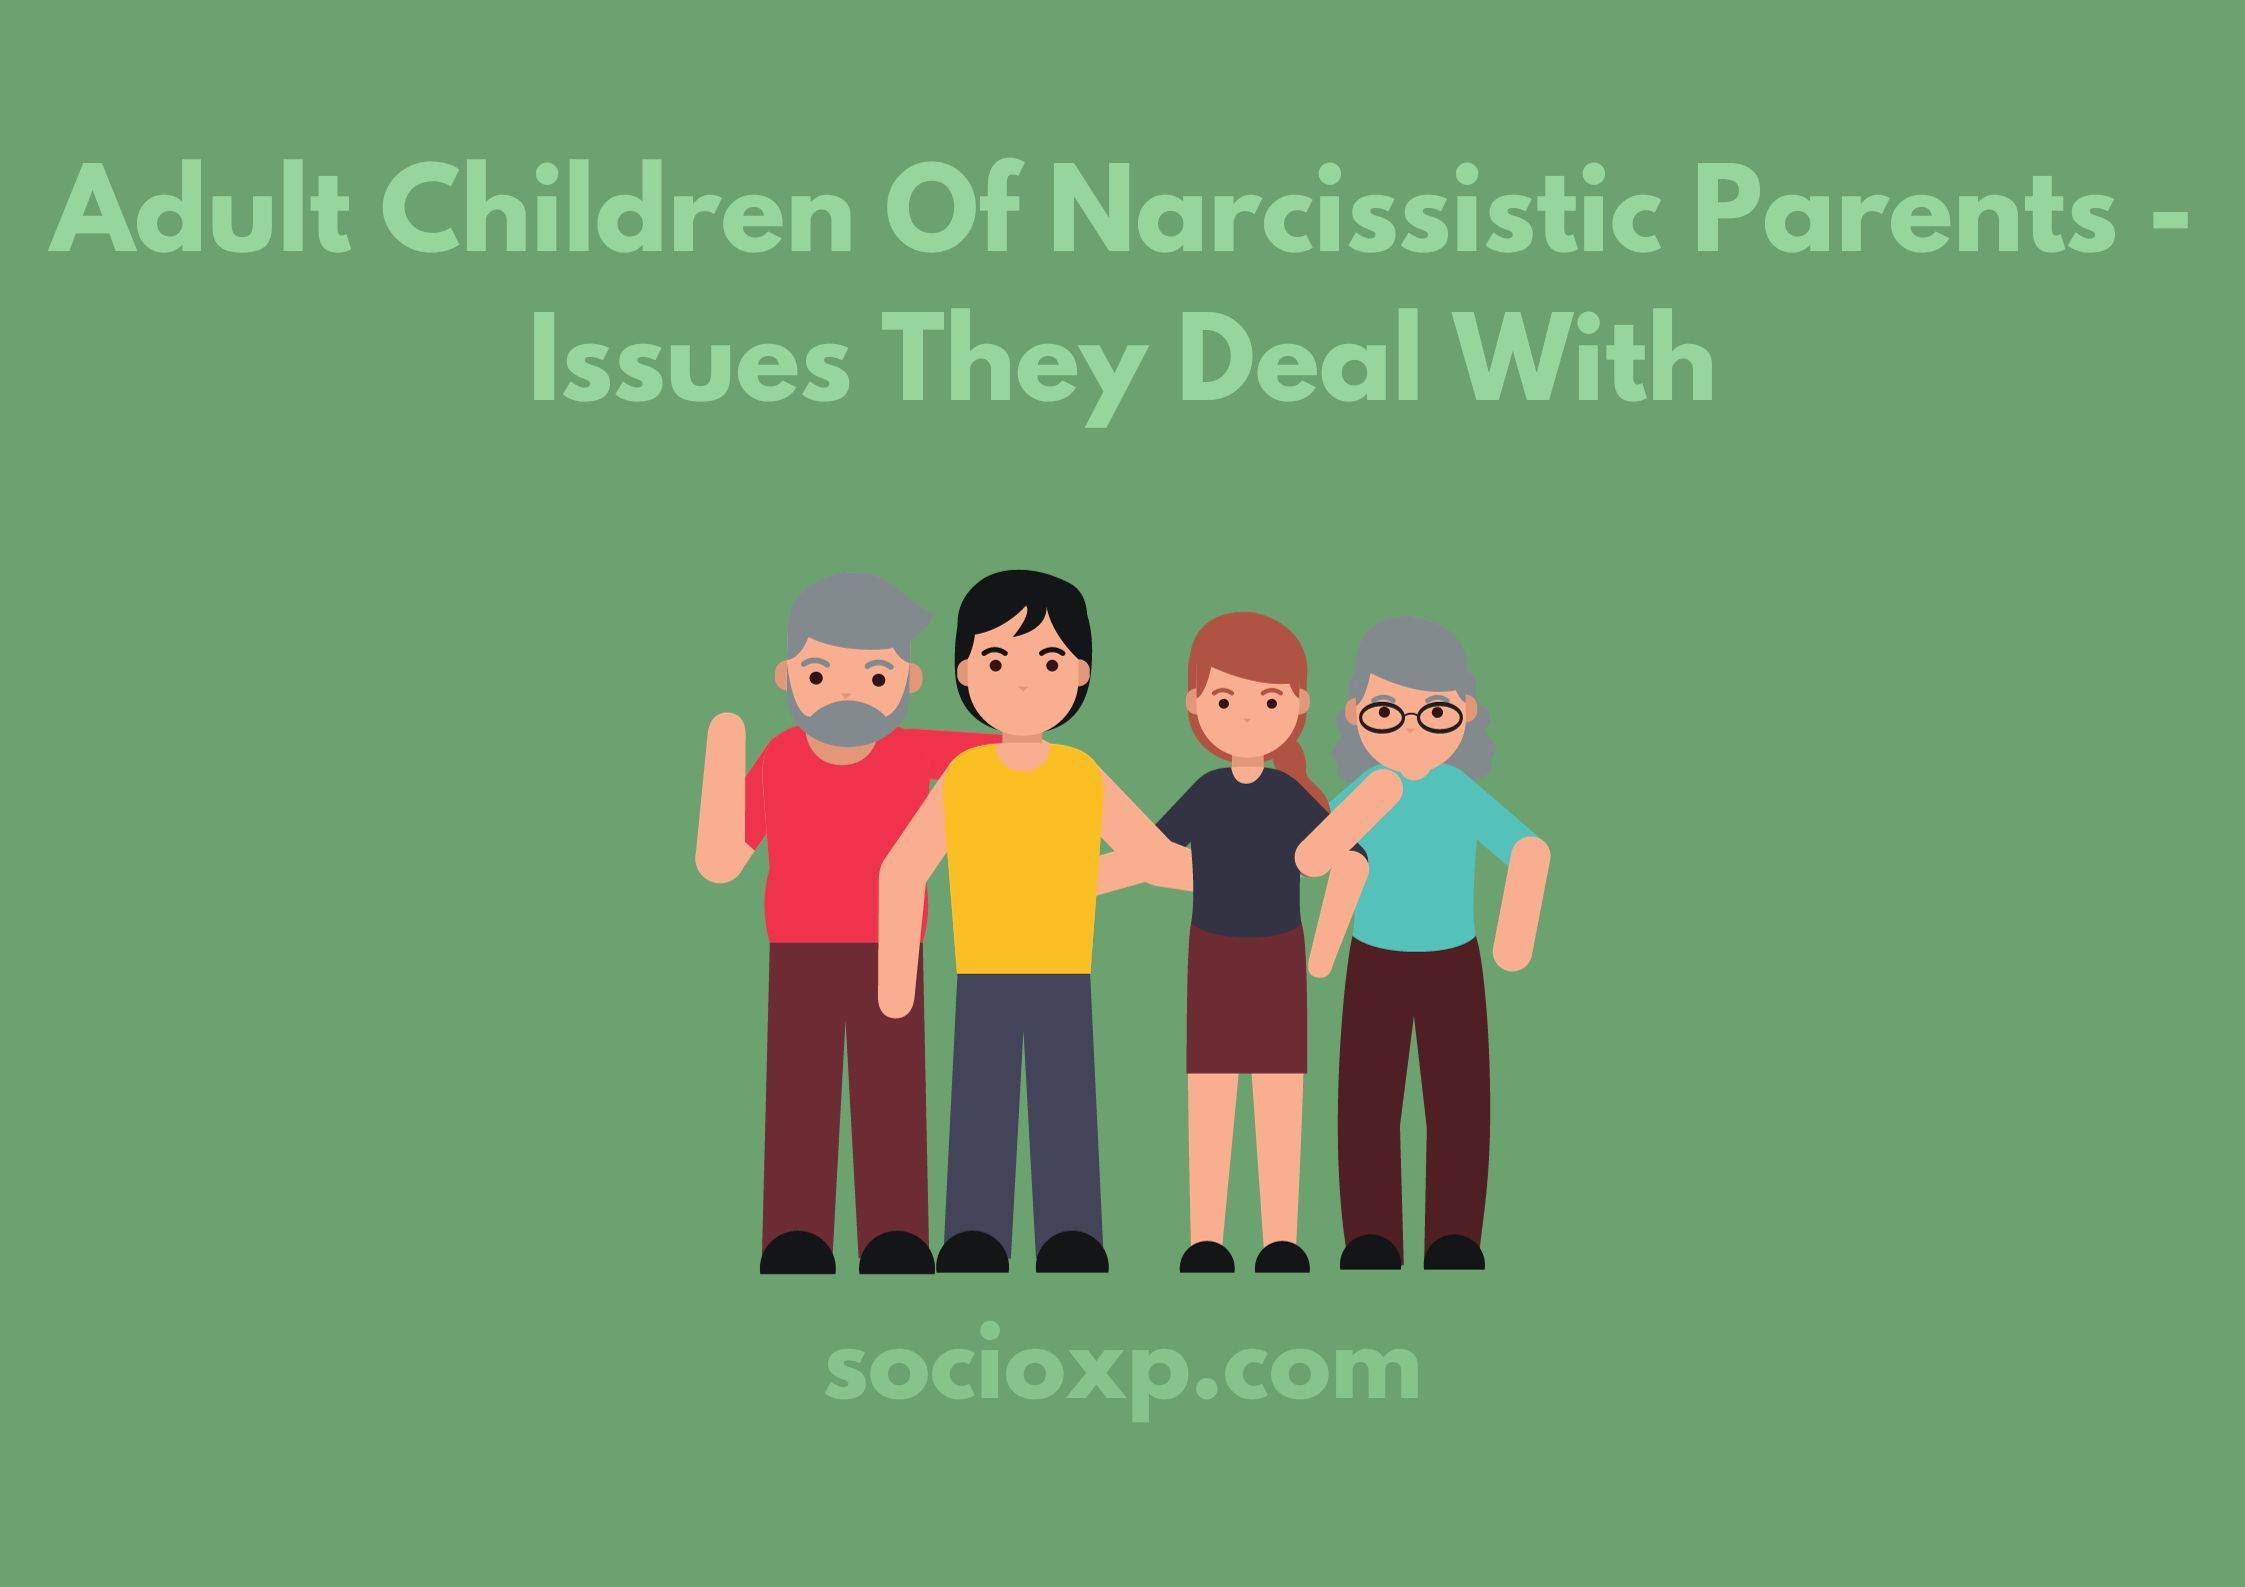 Adult Children Of Narcissistic Parents - Issues They Deal With